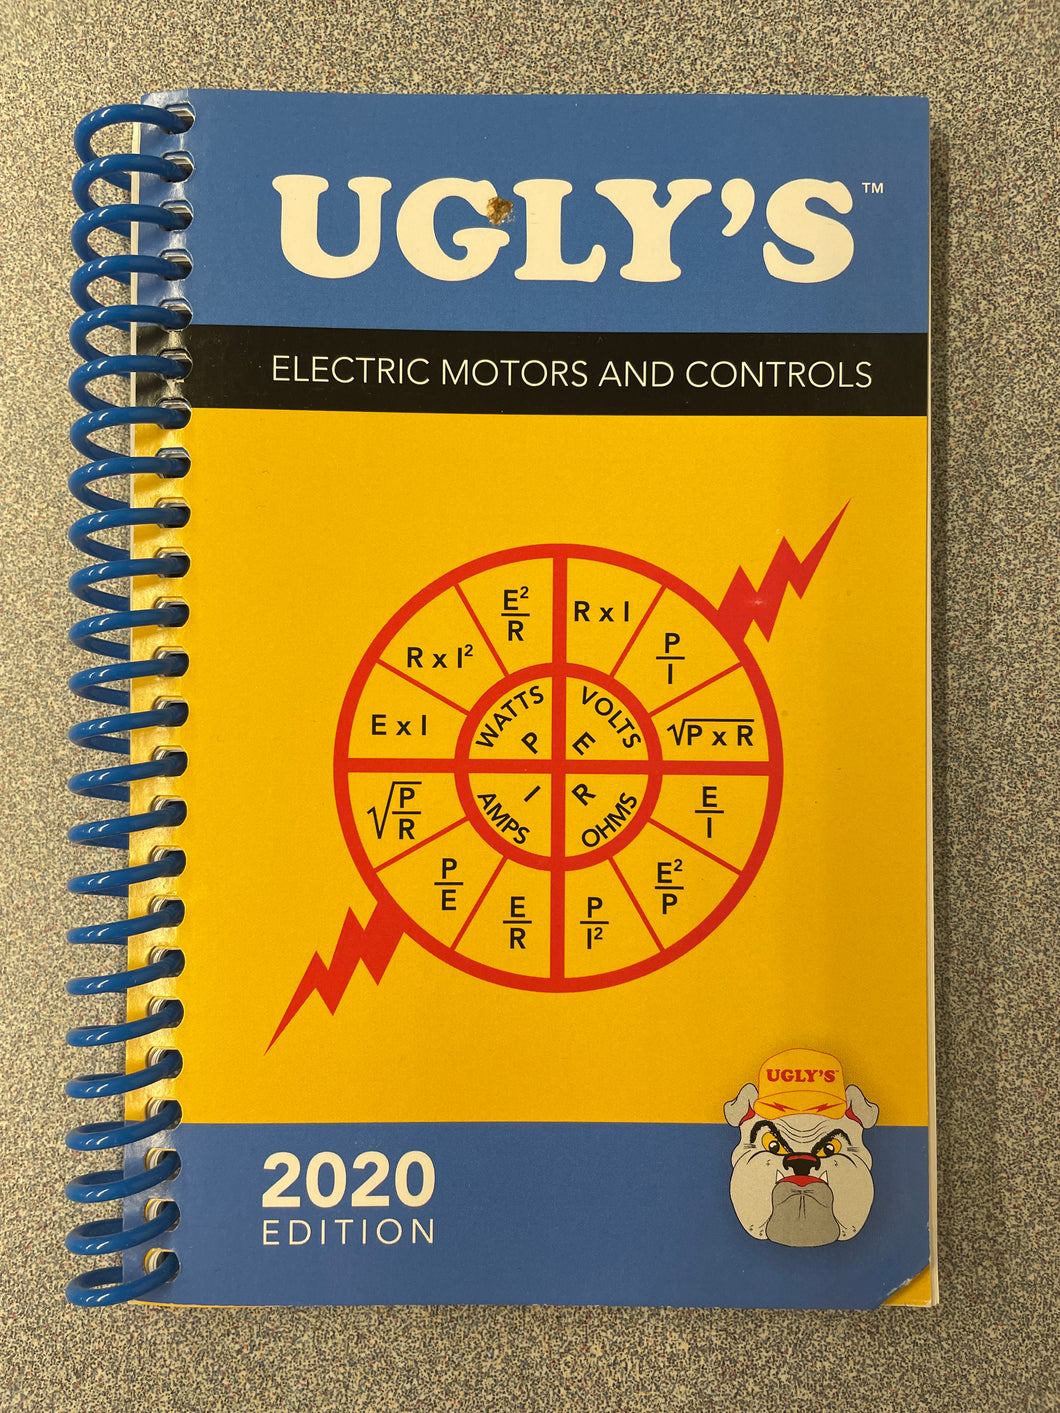 REF Ugly's Electric Motors and Controls 2020 Edition, Jones & Bartlett Learning, ed., [2020] N 11/23